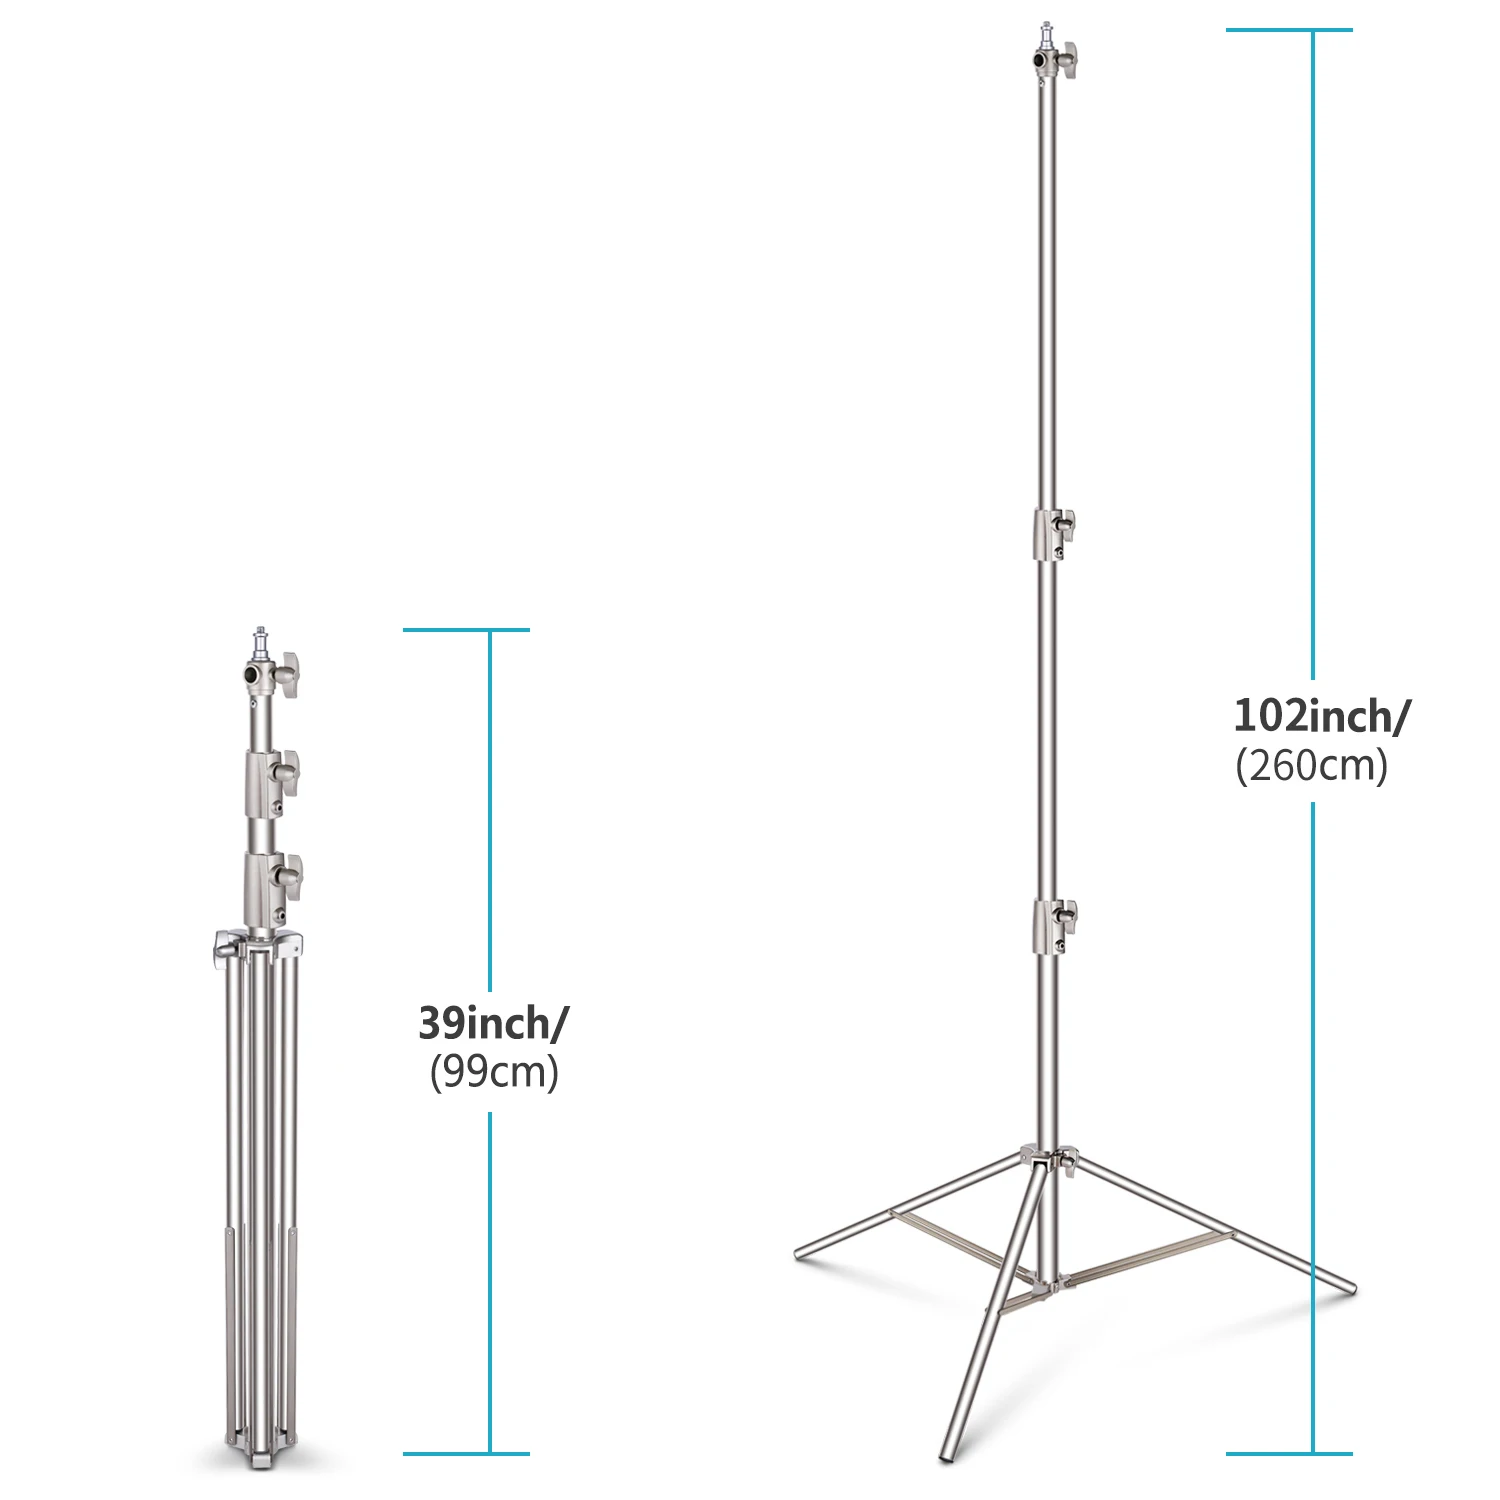 neewer stainless steel light stand 102 inches260cm heavy duty for studio softbox monolight and other photographic equipment free global shipping